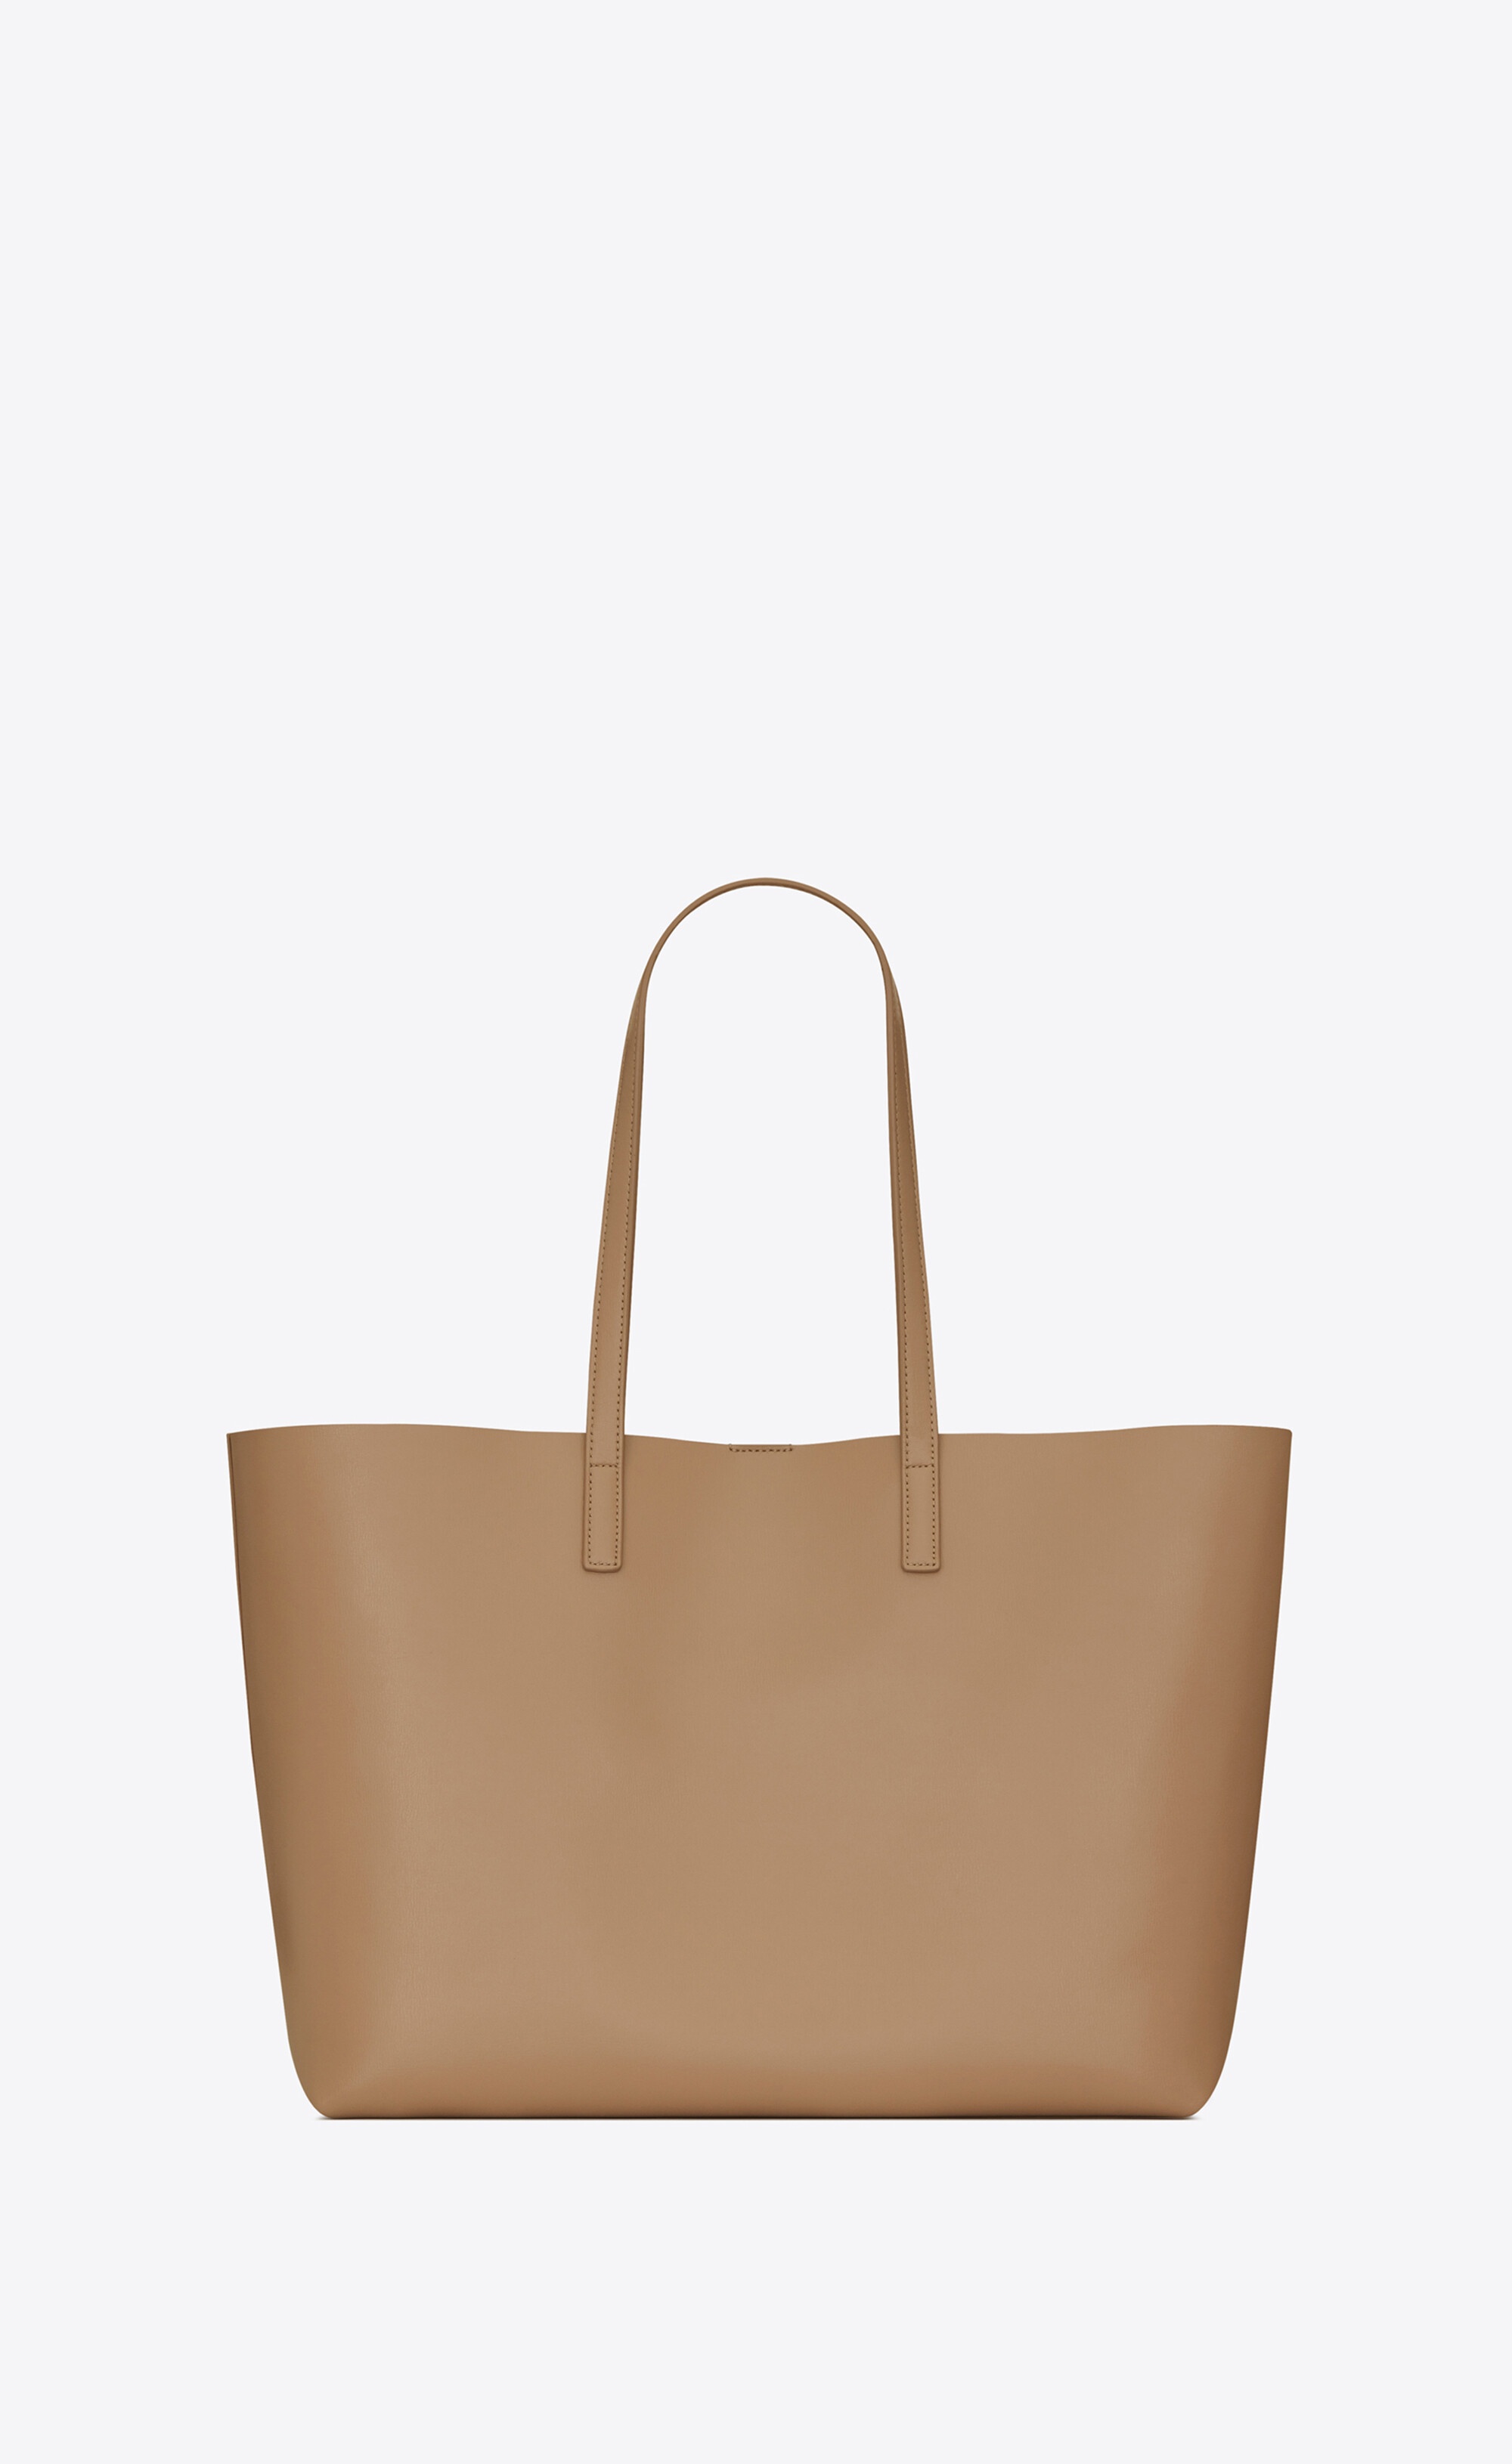 shopping bag saint laurent e/w in supple leather - 4